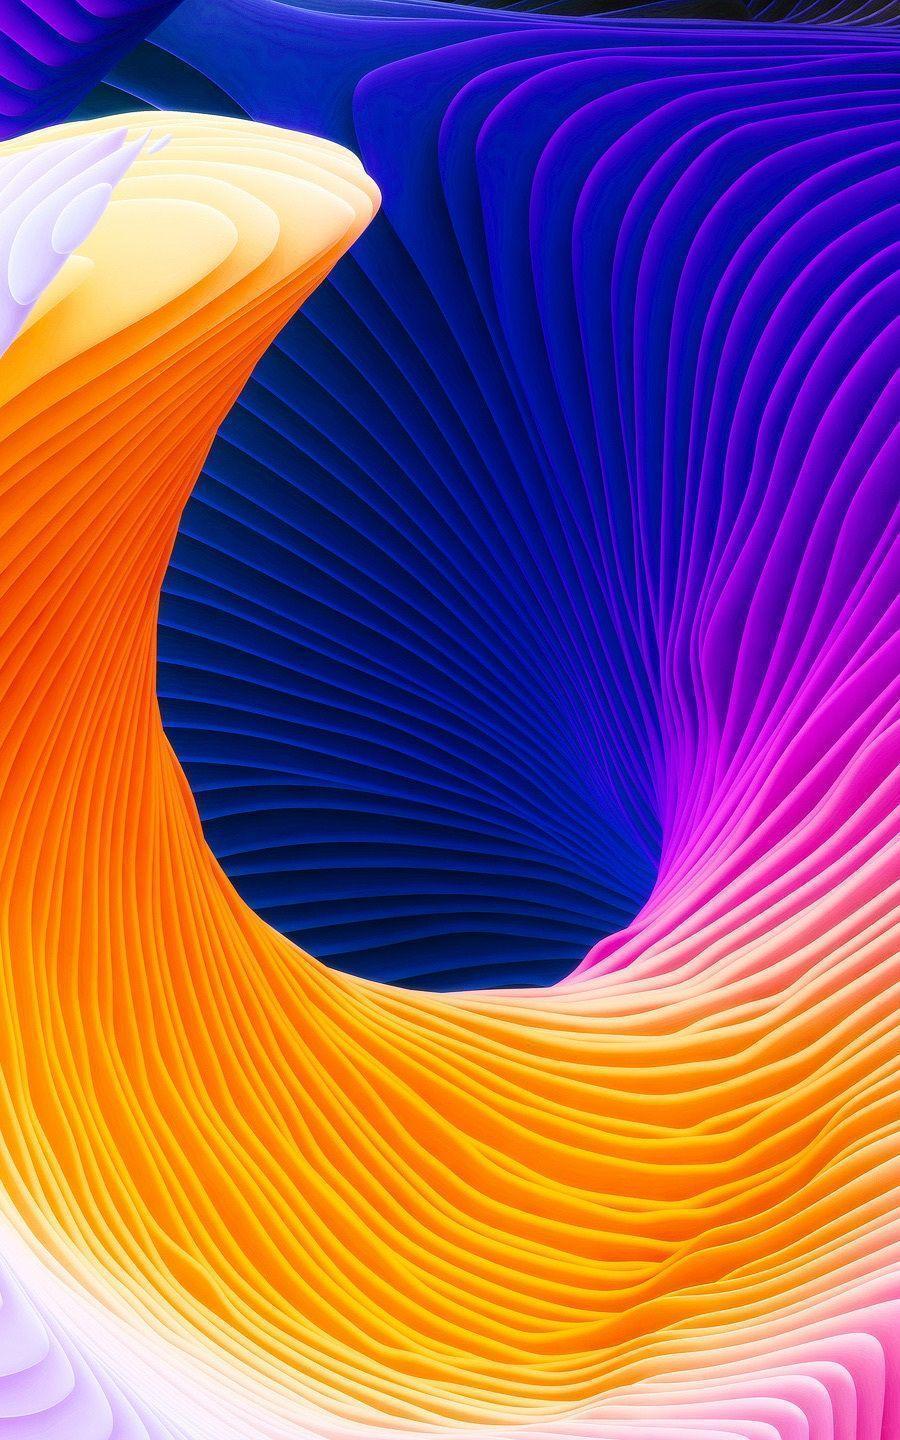 Here are 400 beautiful wallpapers to enjoy on your new iPhone 7